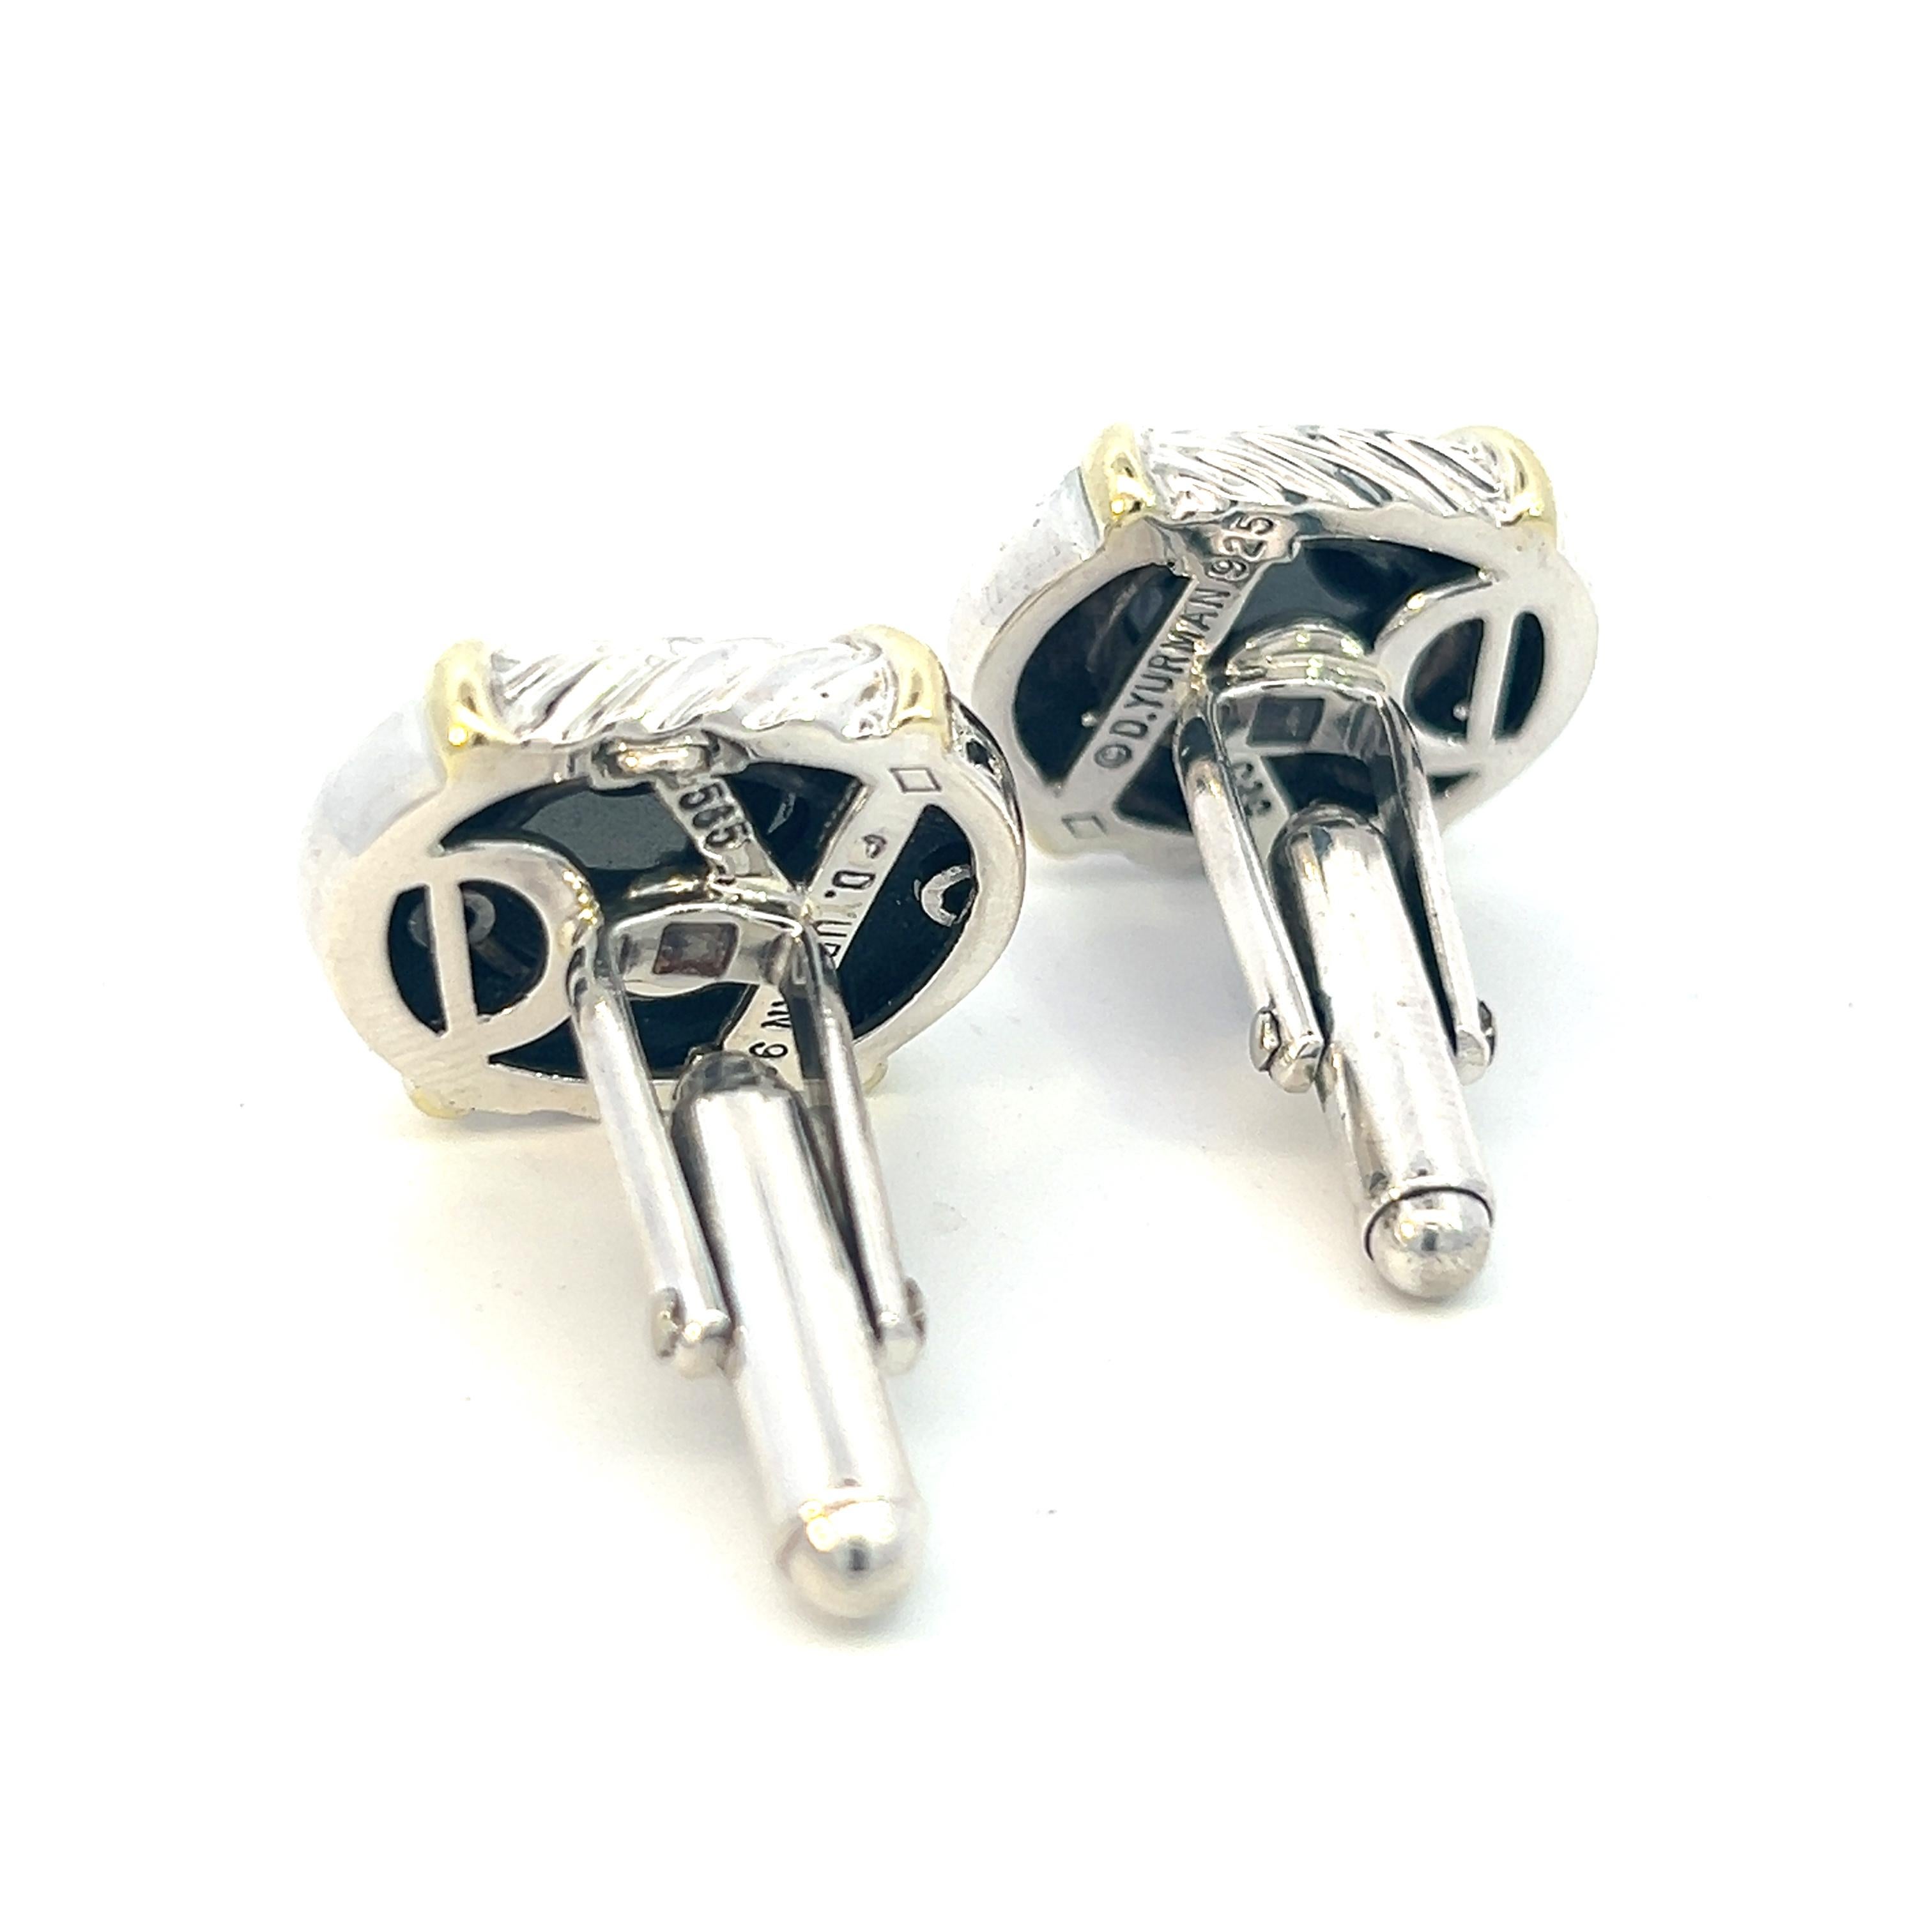 David Yurman Authentic Estate Hematite Cufflinks 14k Gold & Silver 17 Grams In Good Condition For Sale In Brooklyn, NY